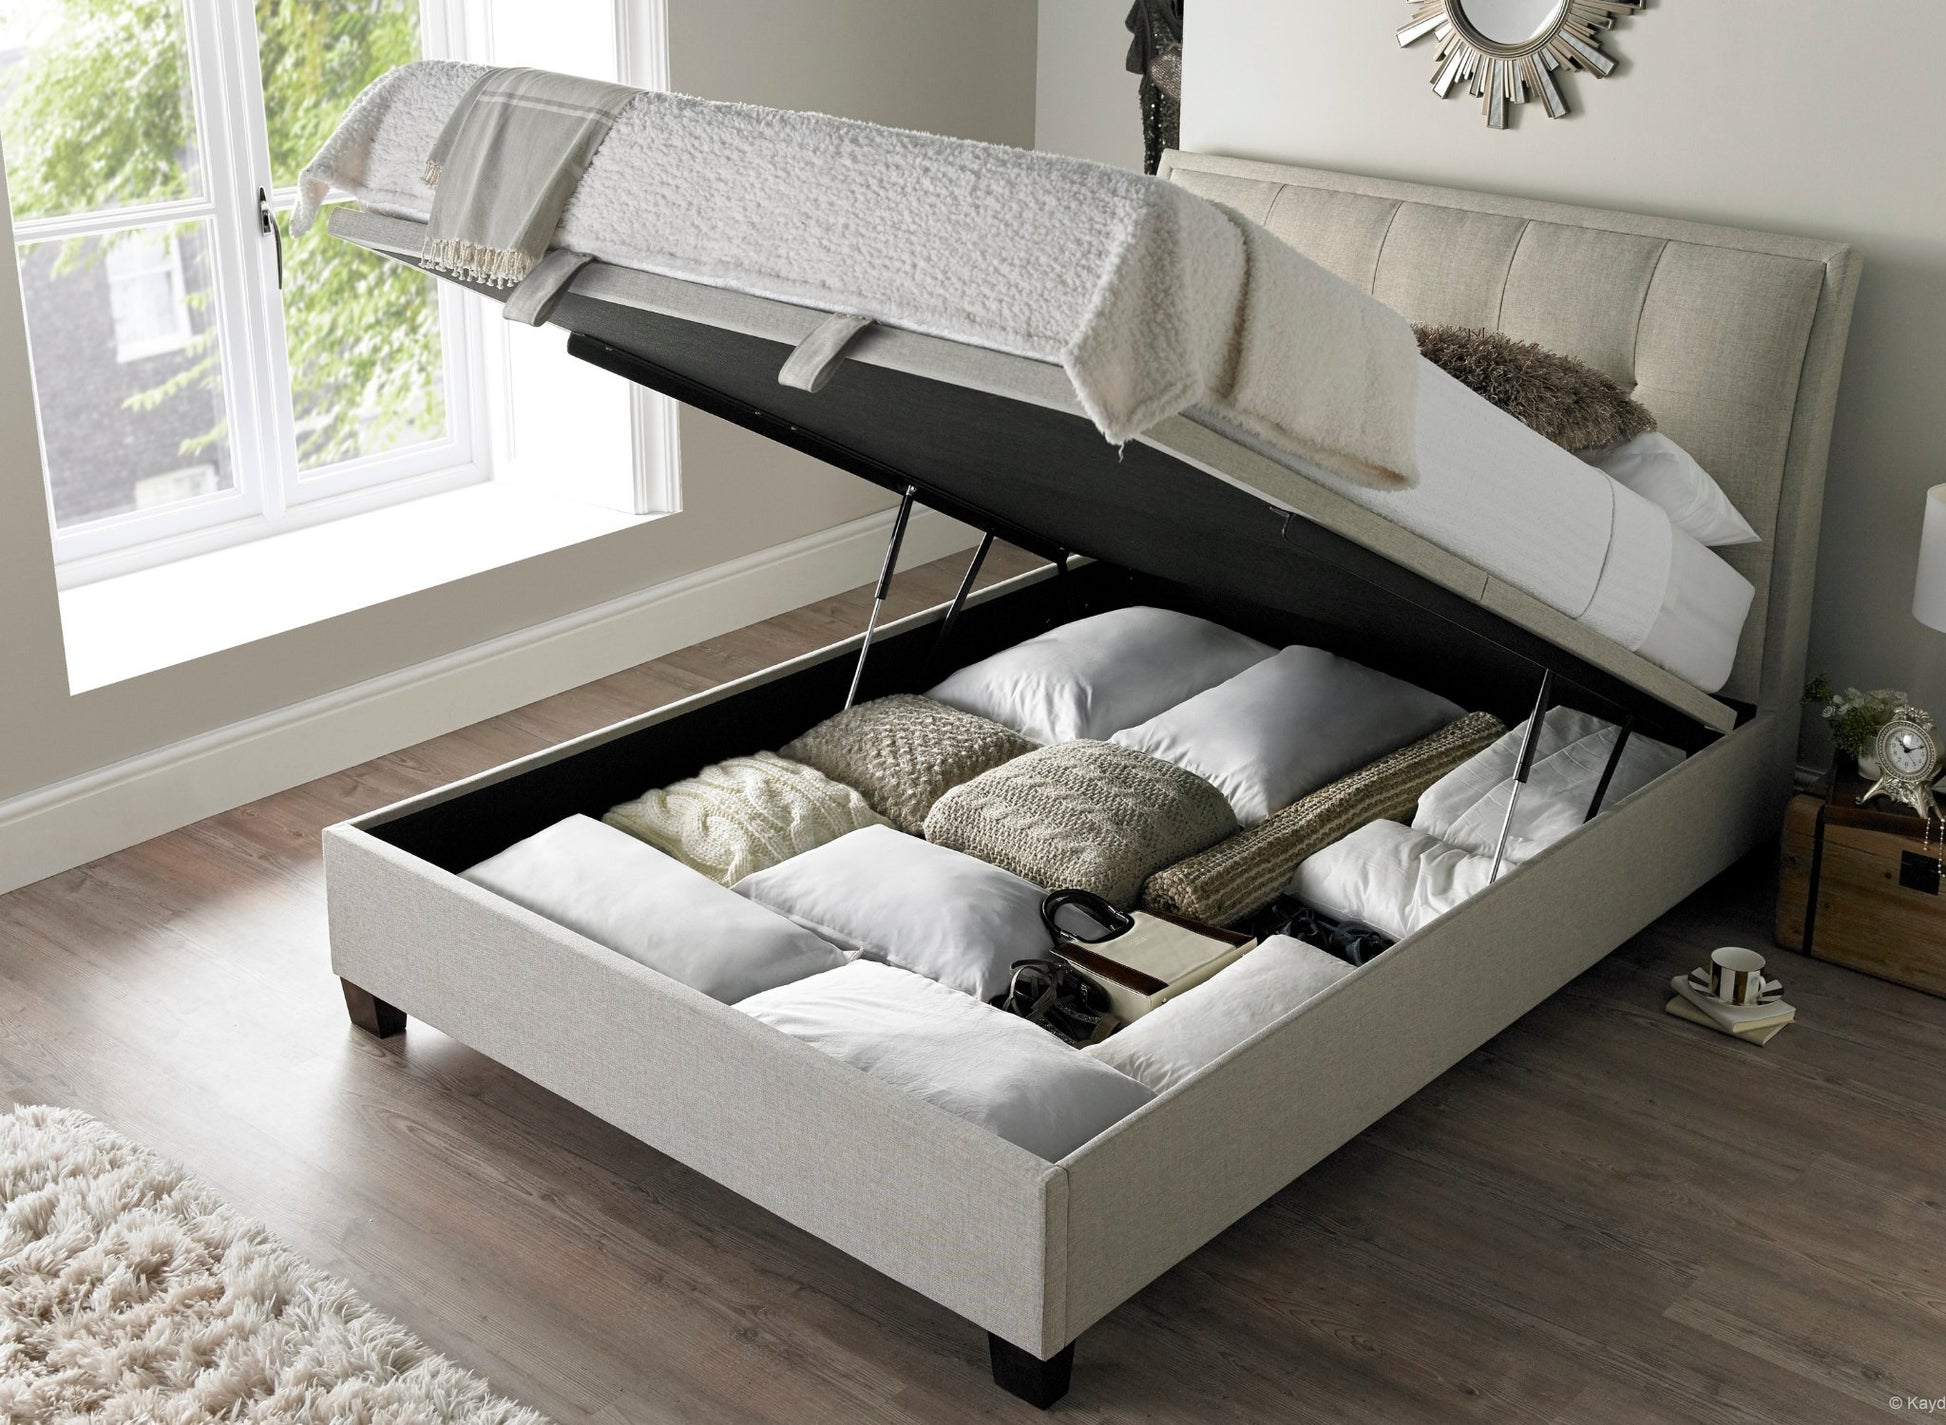 Accent Ottoman Storage Bed Frame - Oatmeal - TV Beds NorthwestACC135OA